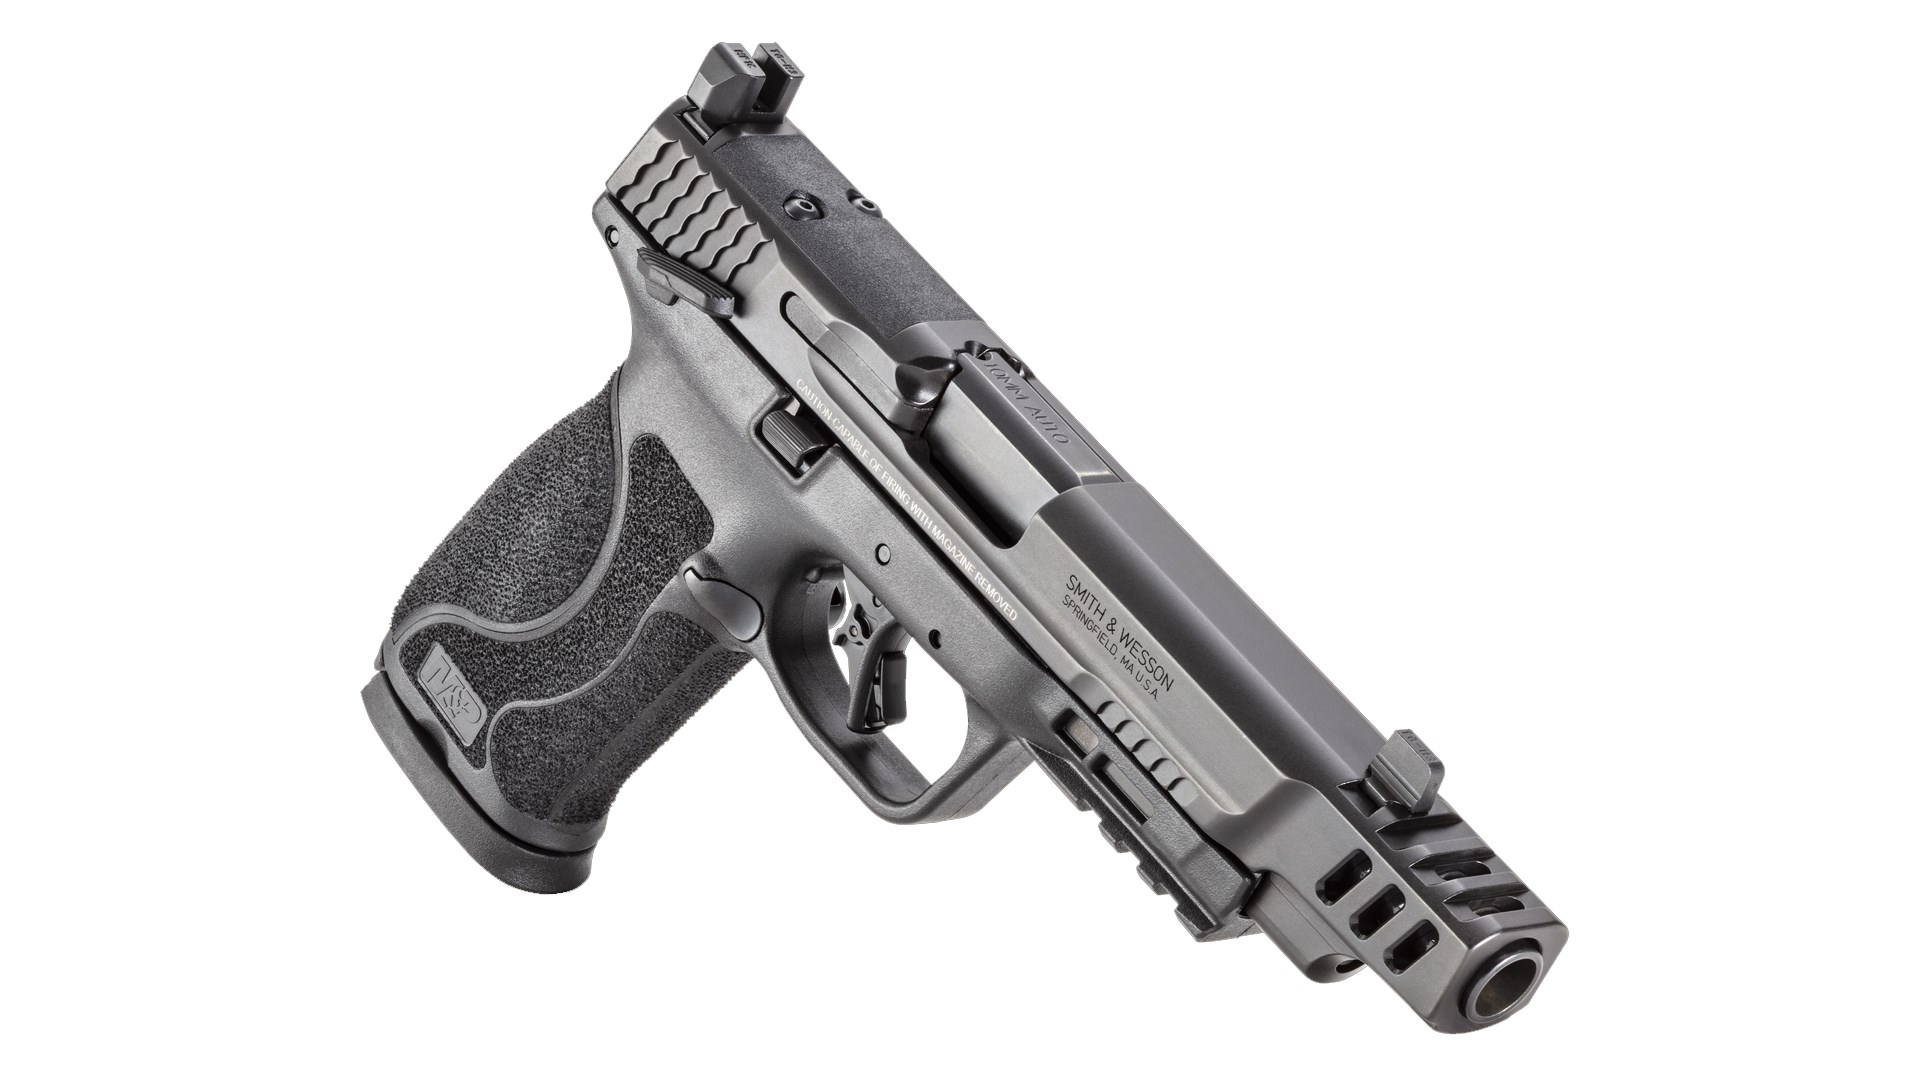 Top side of the Smith & Wesson M&P 10 mm Performance Center Edition shown on white.